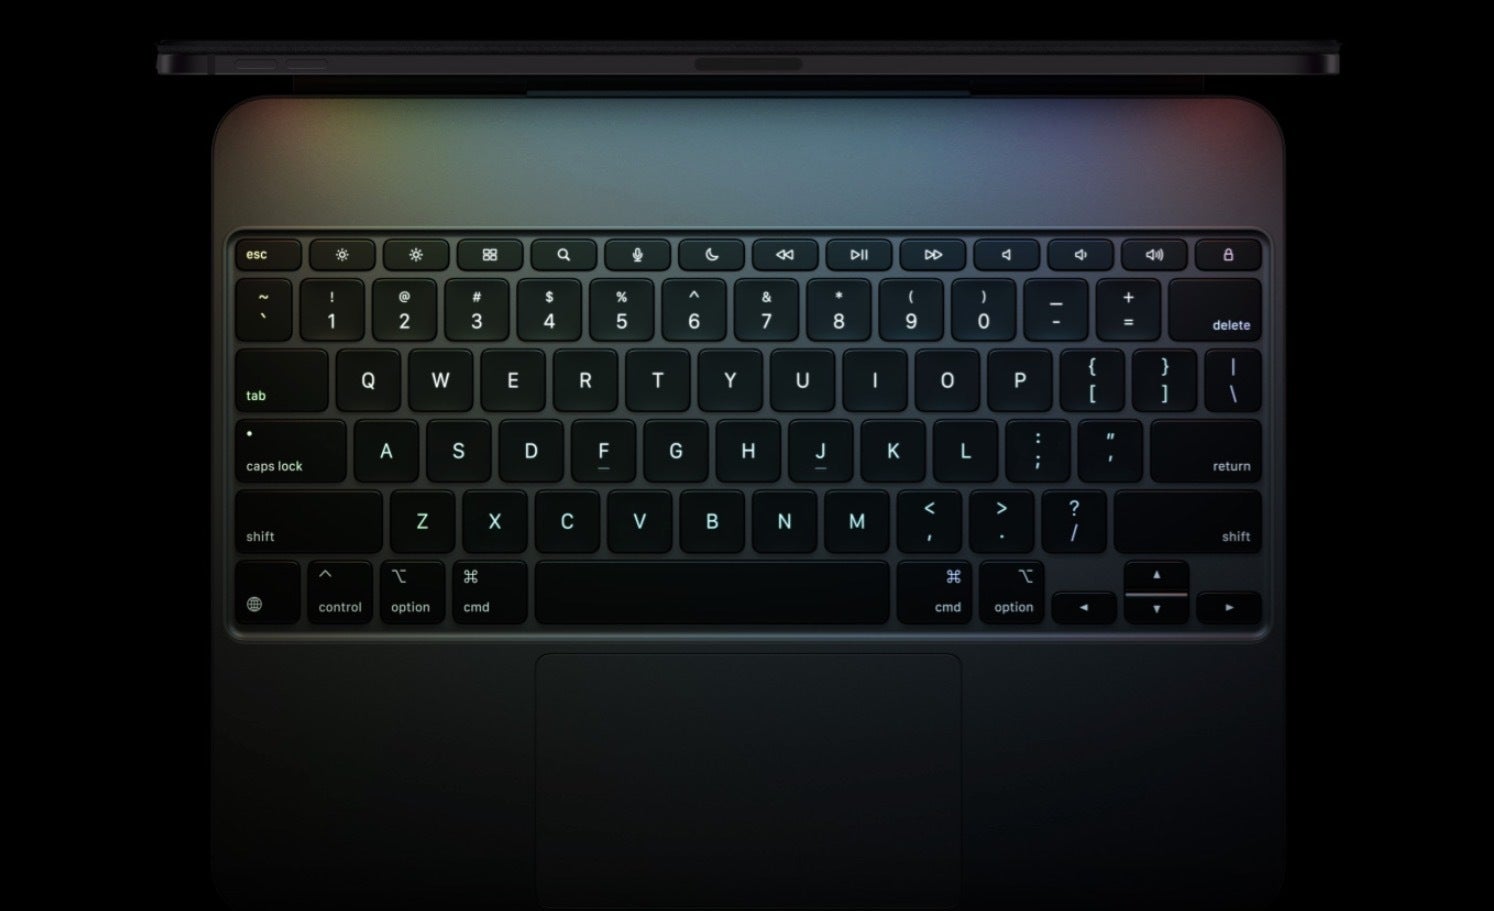 5 Reasons to Buy the New M4 iPad Pro (with some caveats)